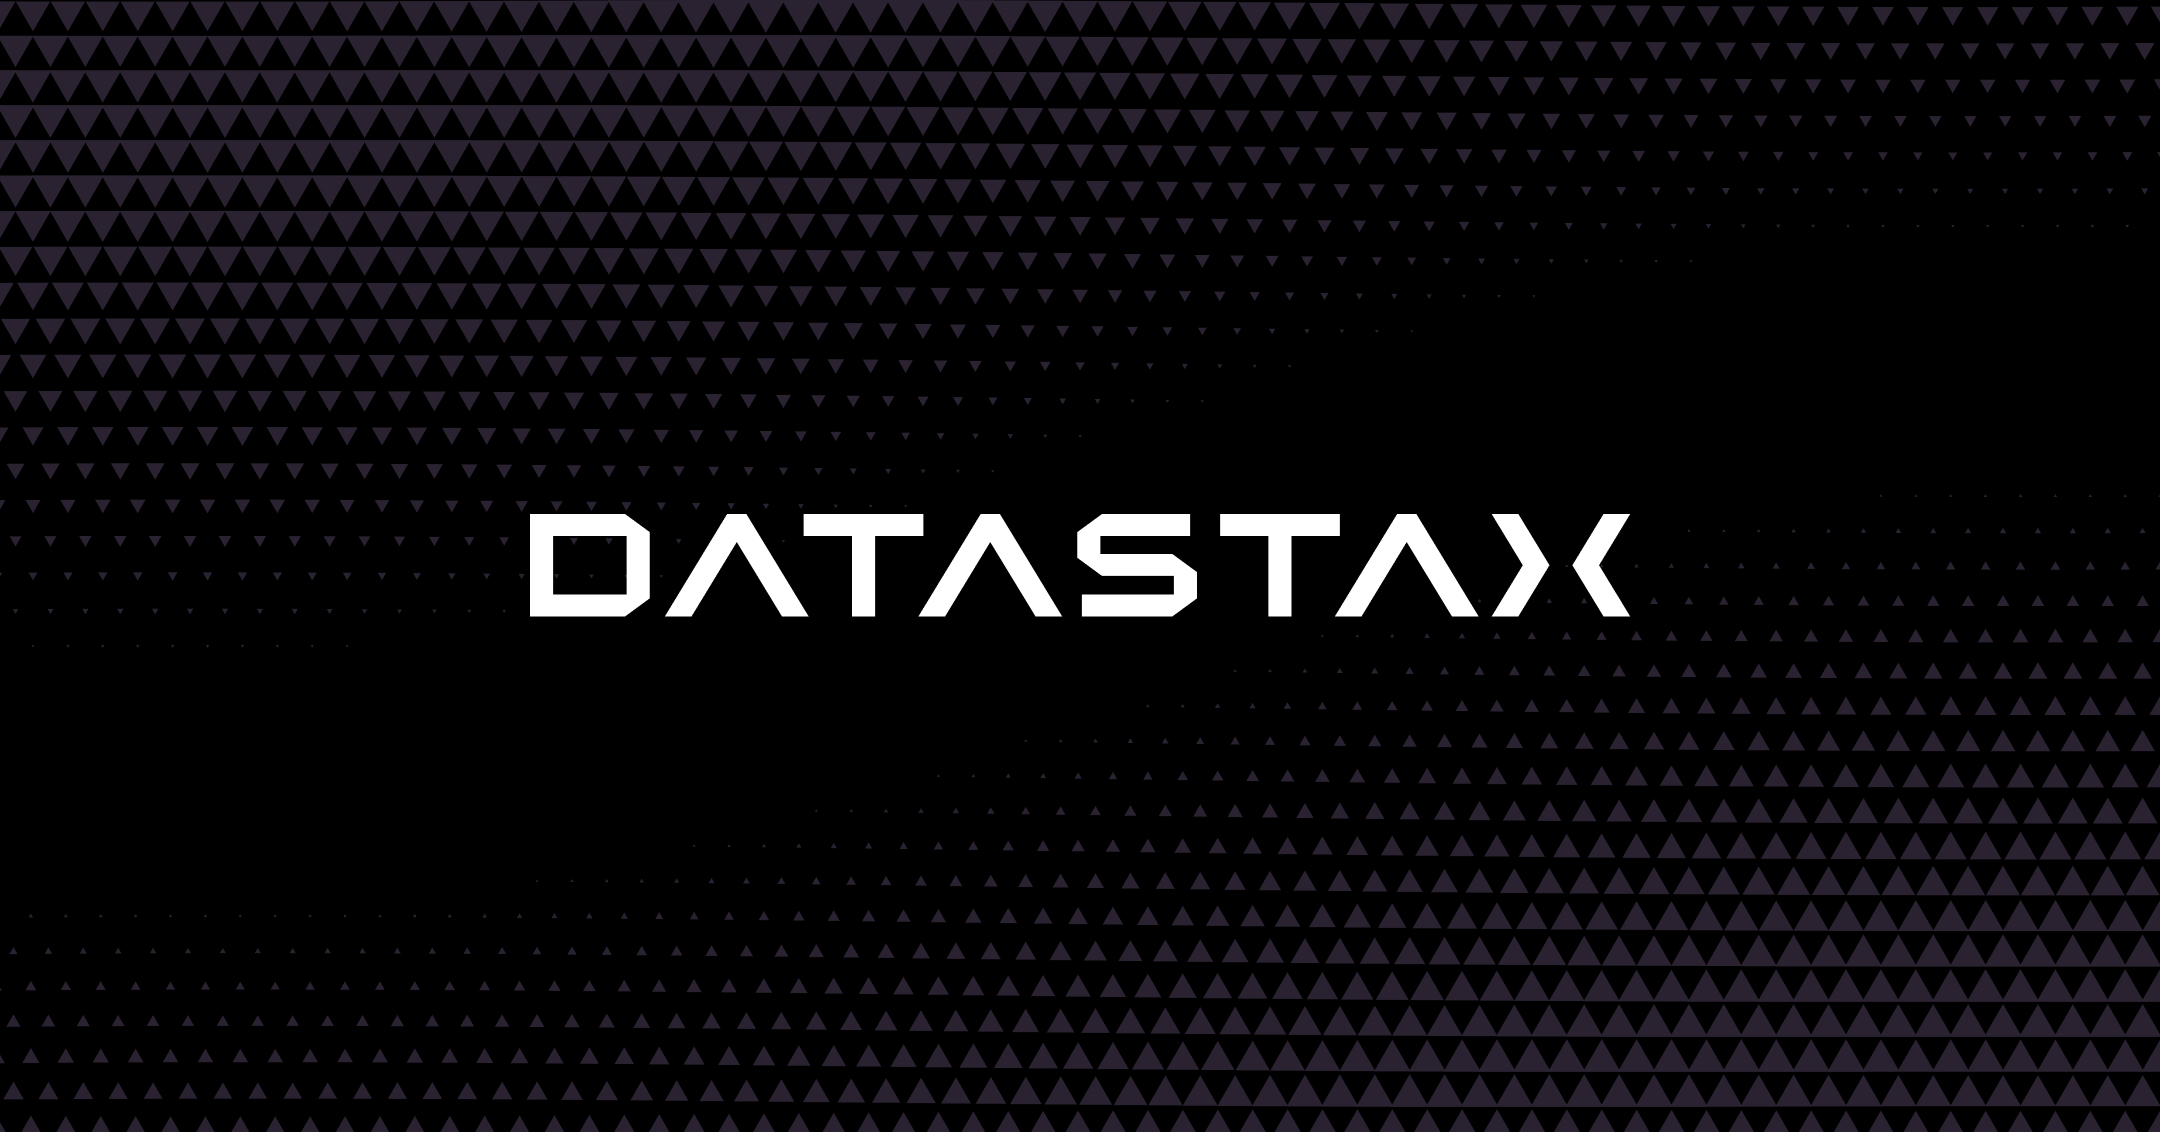 DataStax Astra DB Security Overview